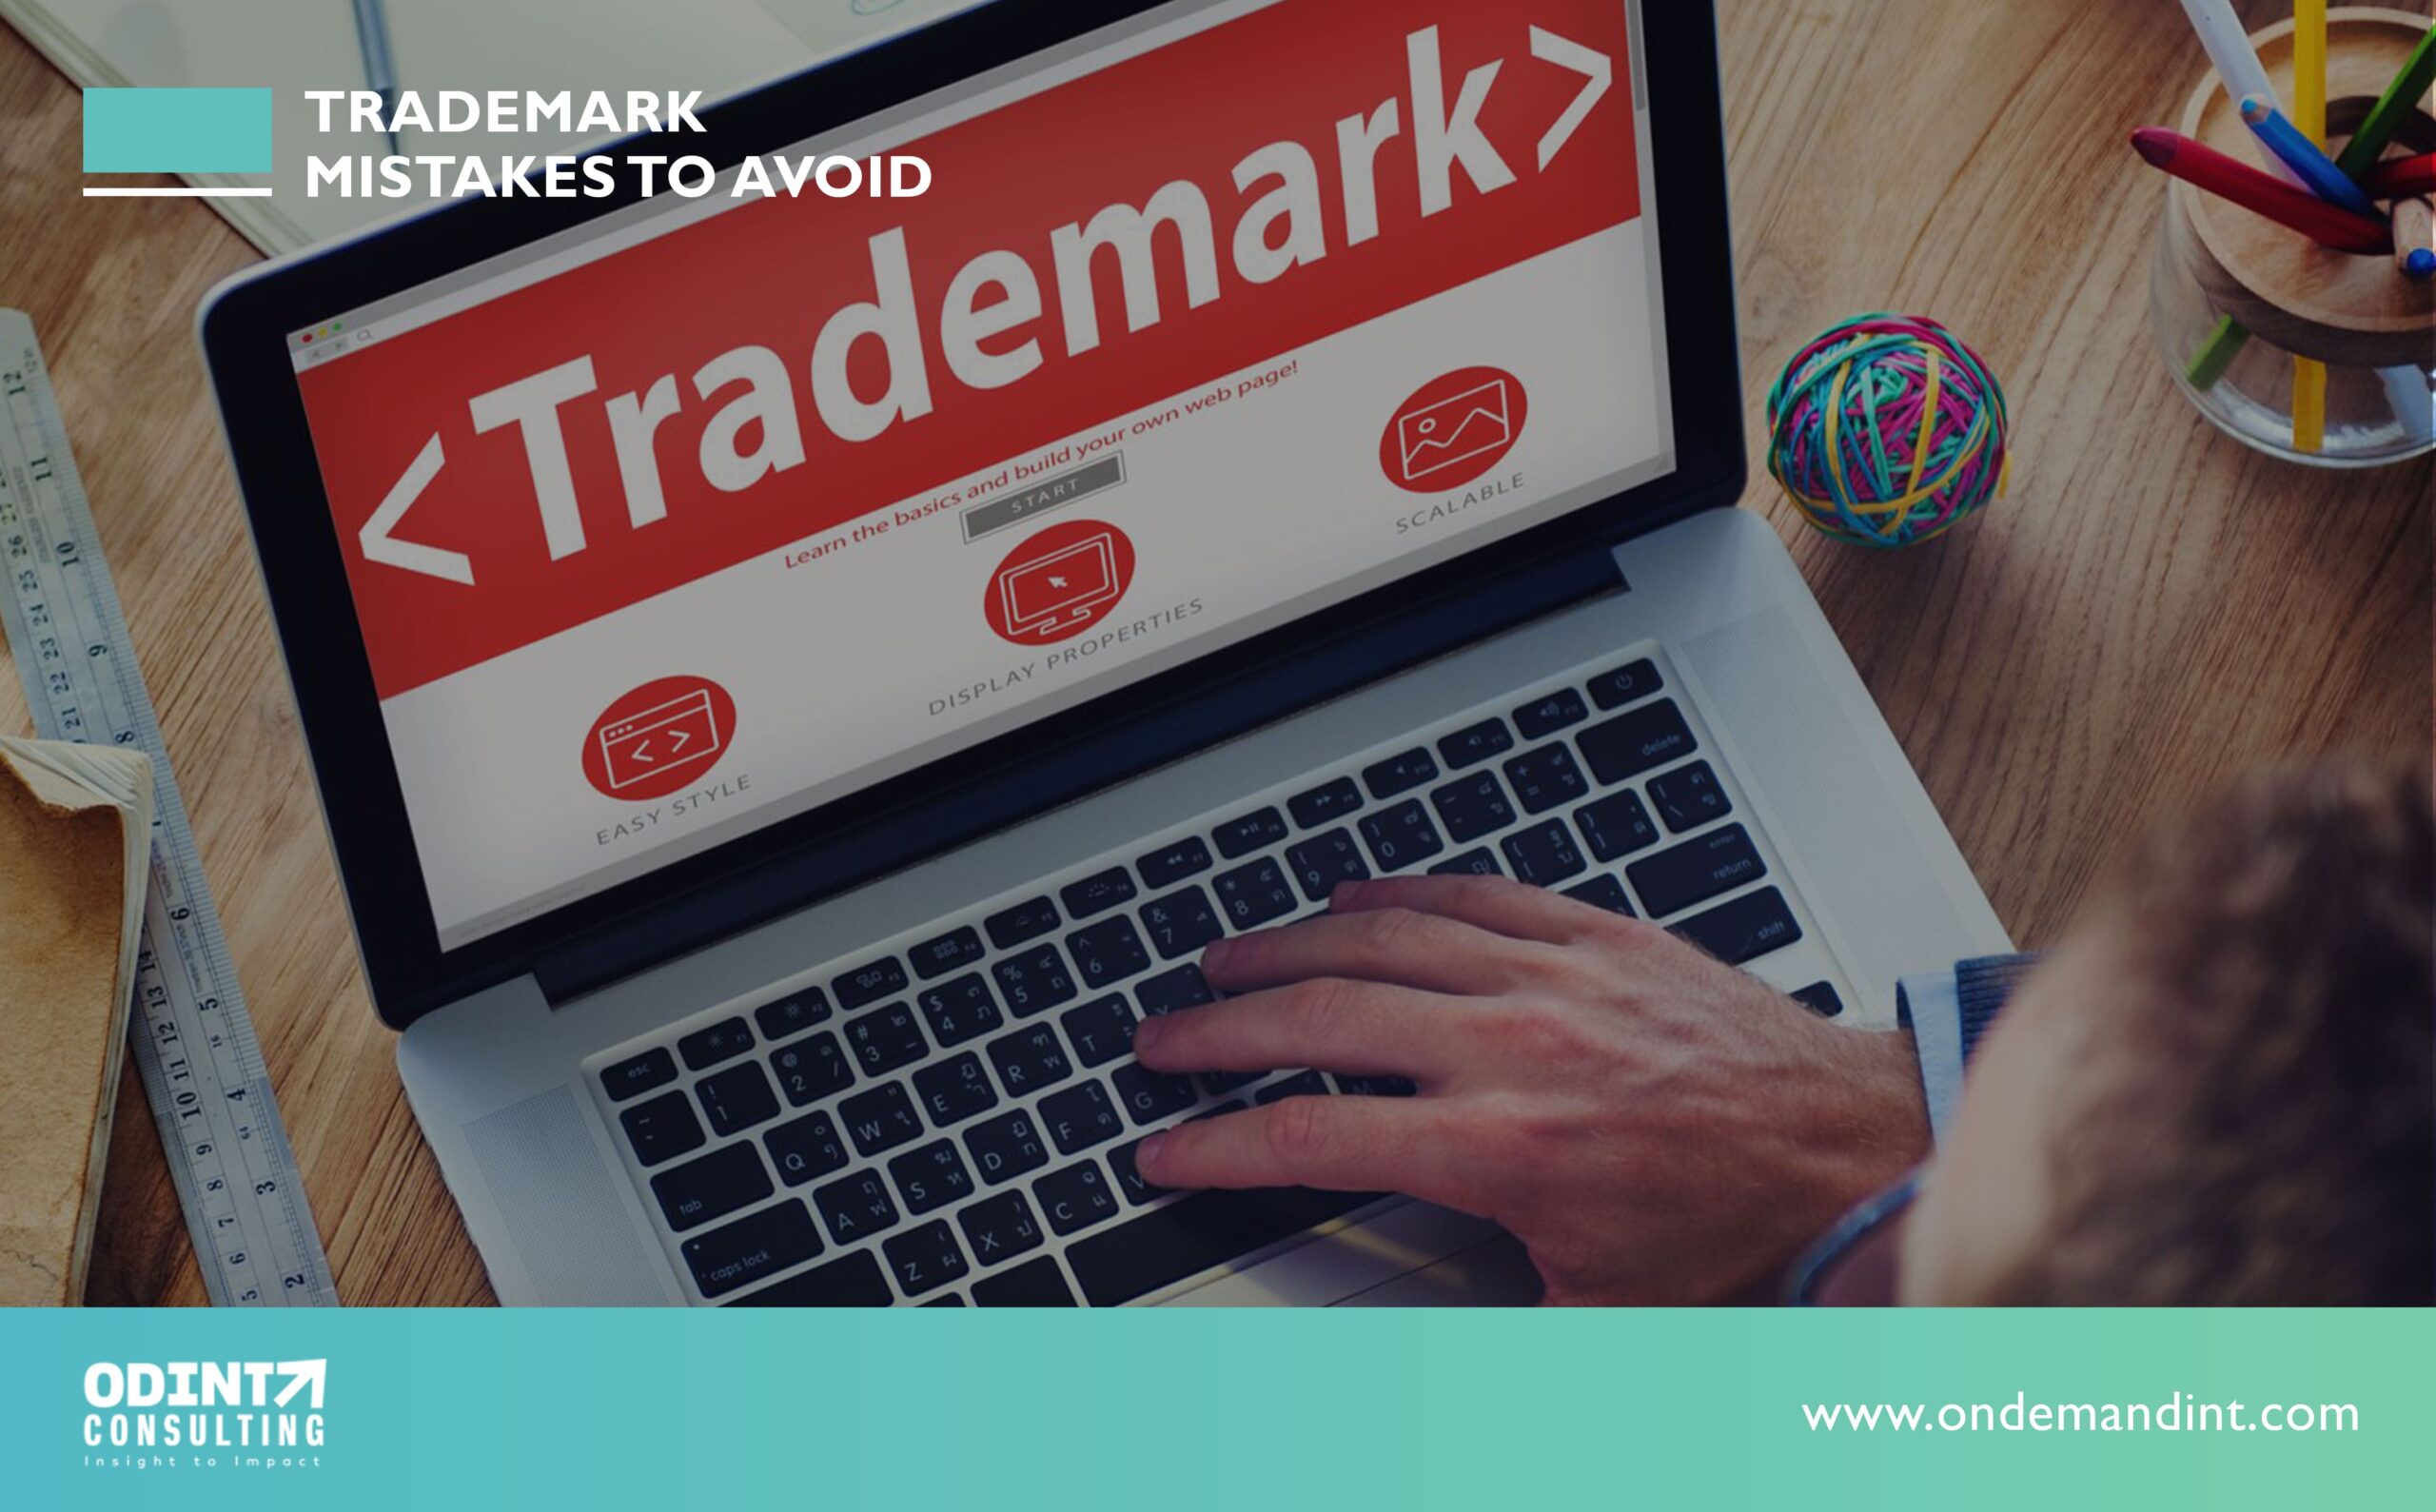 Trademark Mistakes To Avoid: 4 Essential Steps To Consider